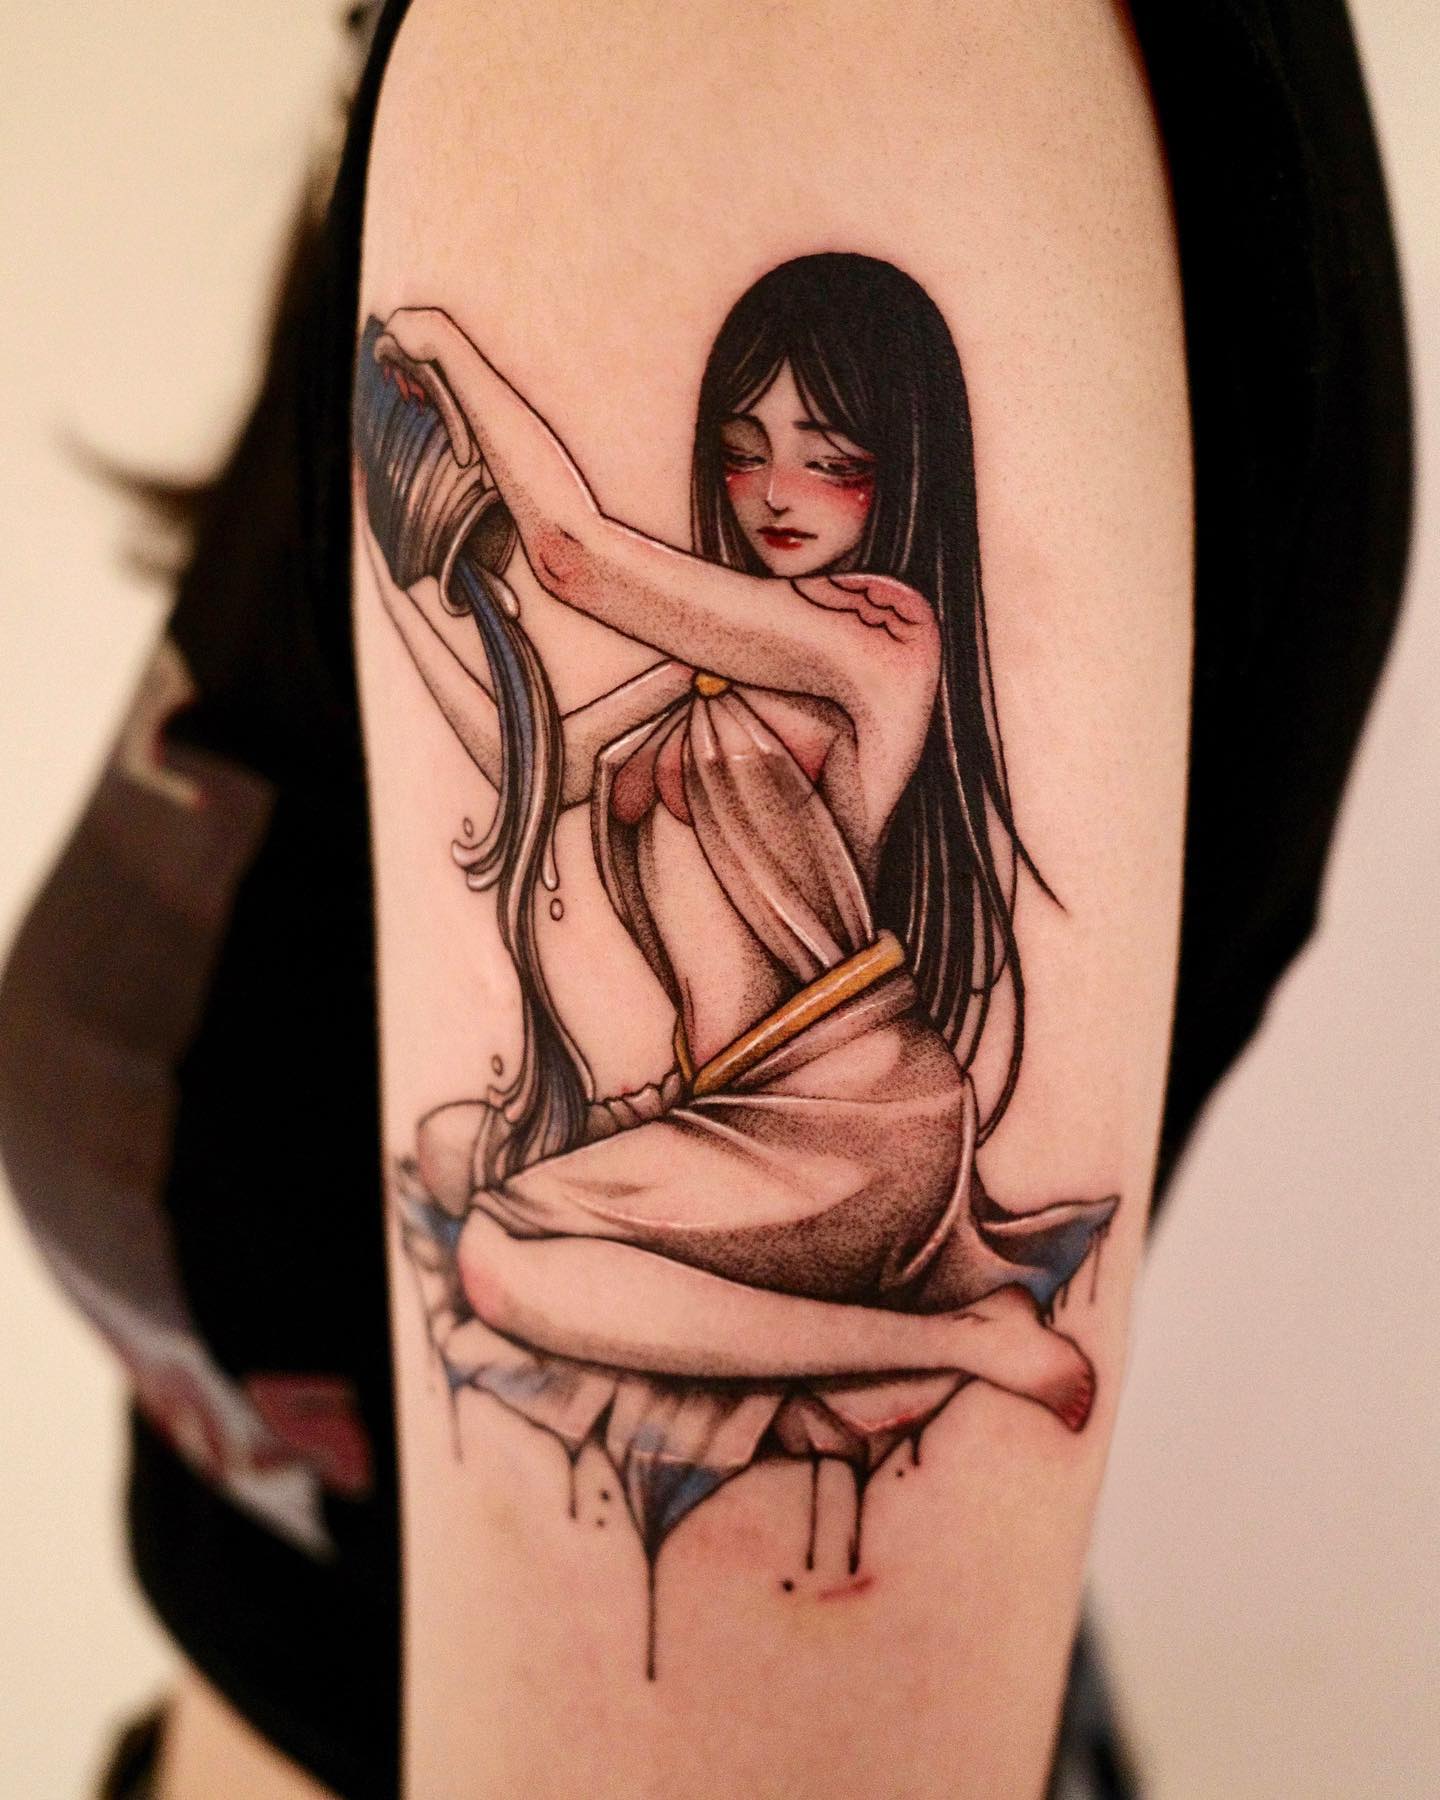 A long-haired Japanese aquarius woman sound sexy, right? Those who like Japanese things in tattoo designs will adore this tattoo. Both guys and girls can have fun with this Aquarius tattoo.